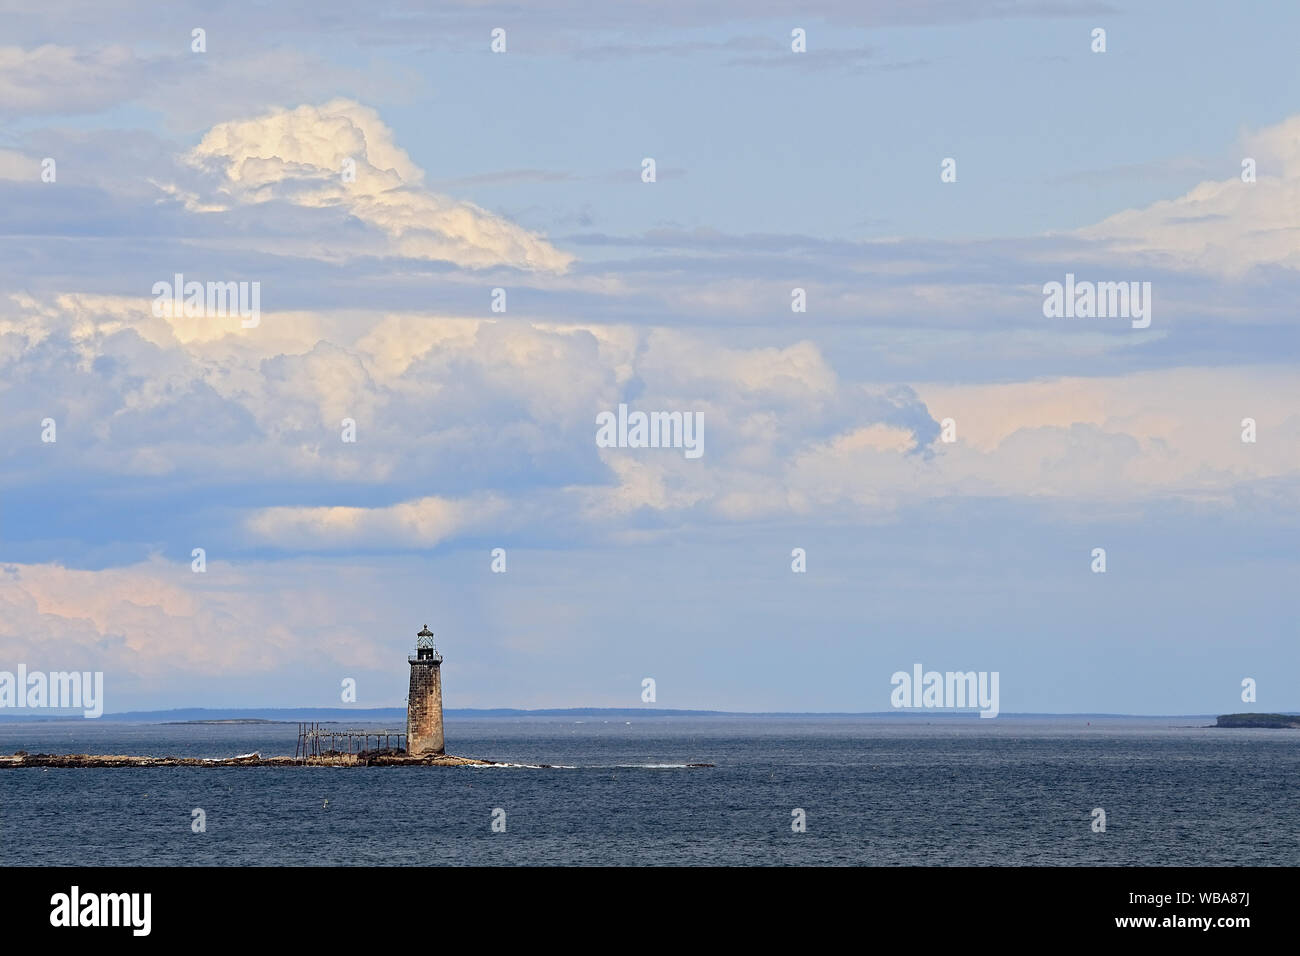 View of Danforth cove and old lighthouse from Fort Williams Park in Portland, Main Stock Photo